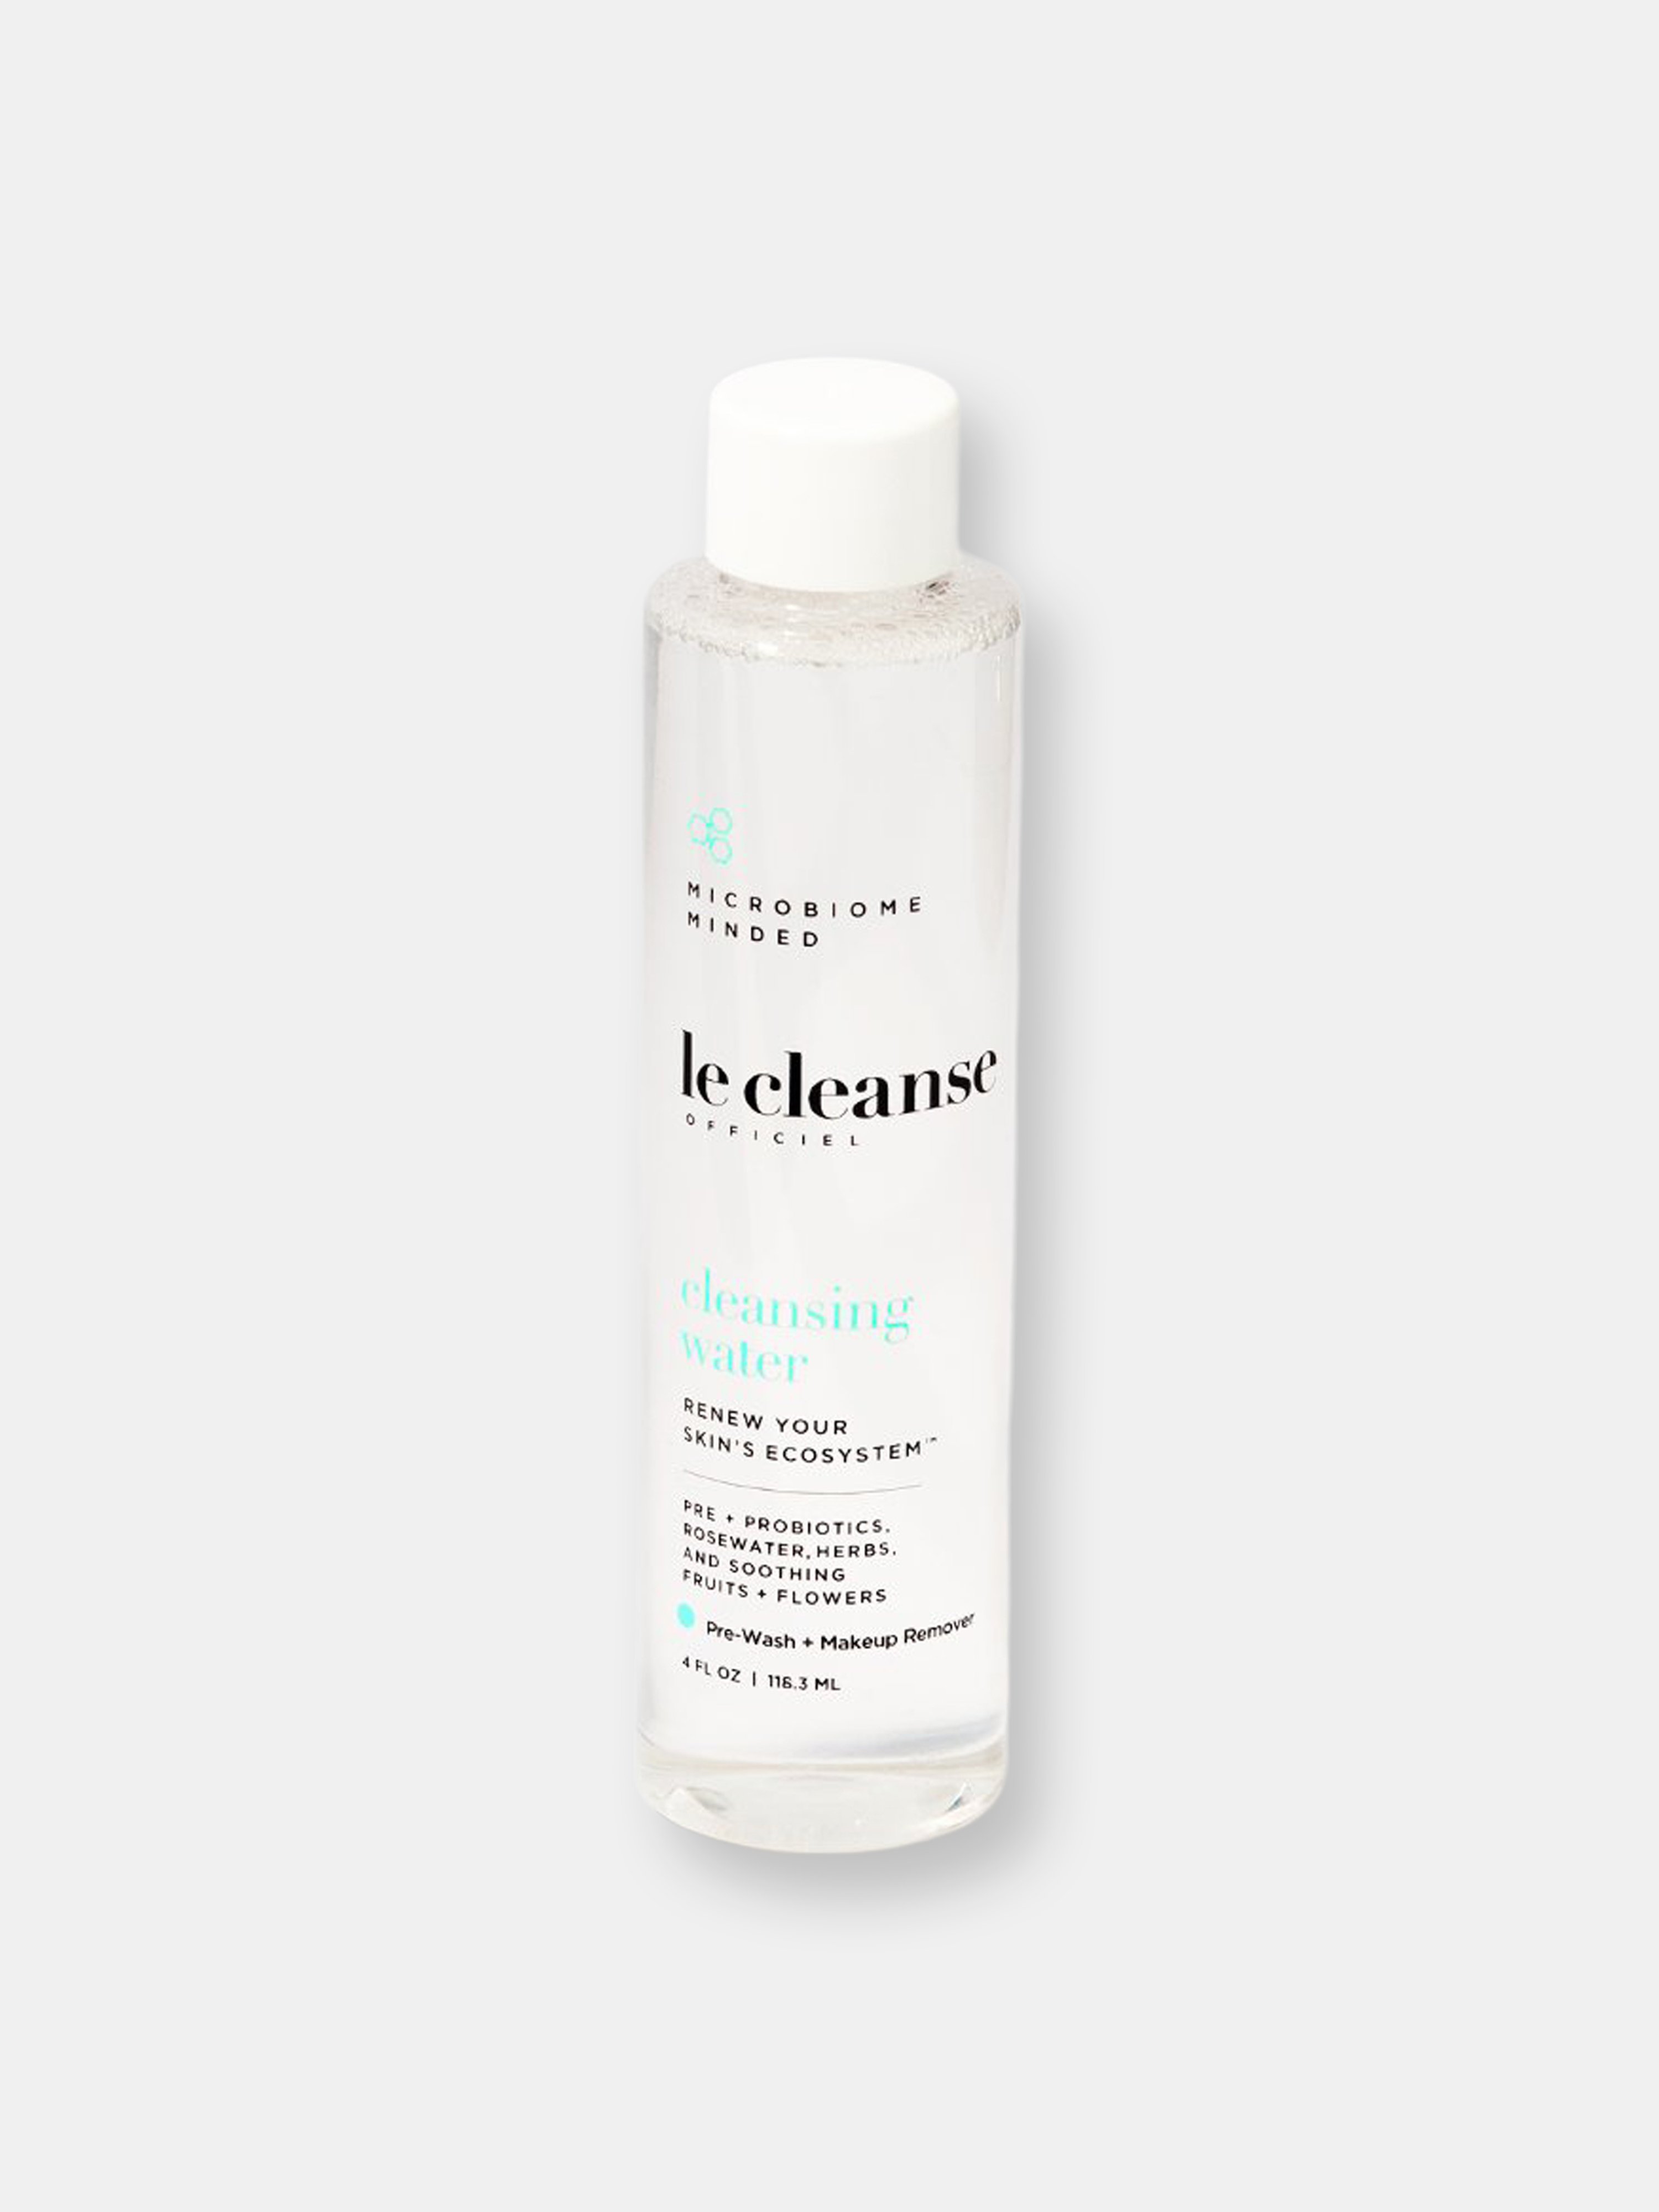 Le Cleanse Officiel Cleansing Water